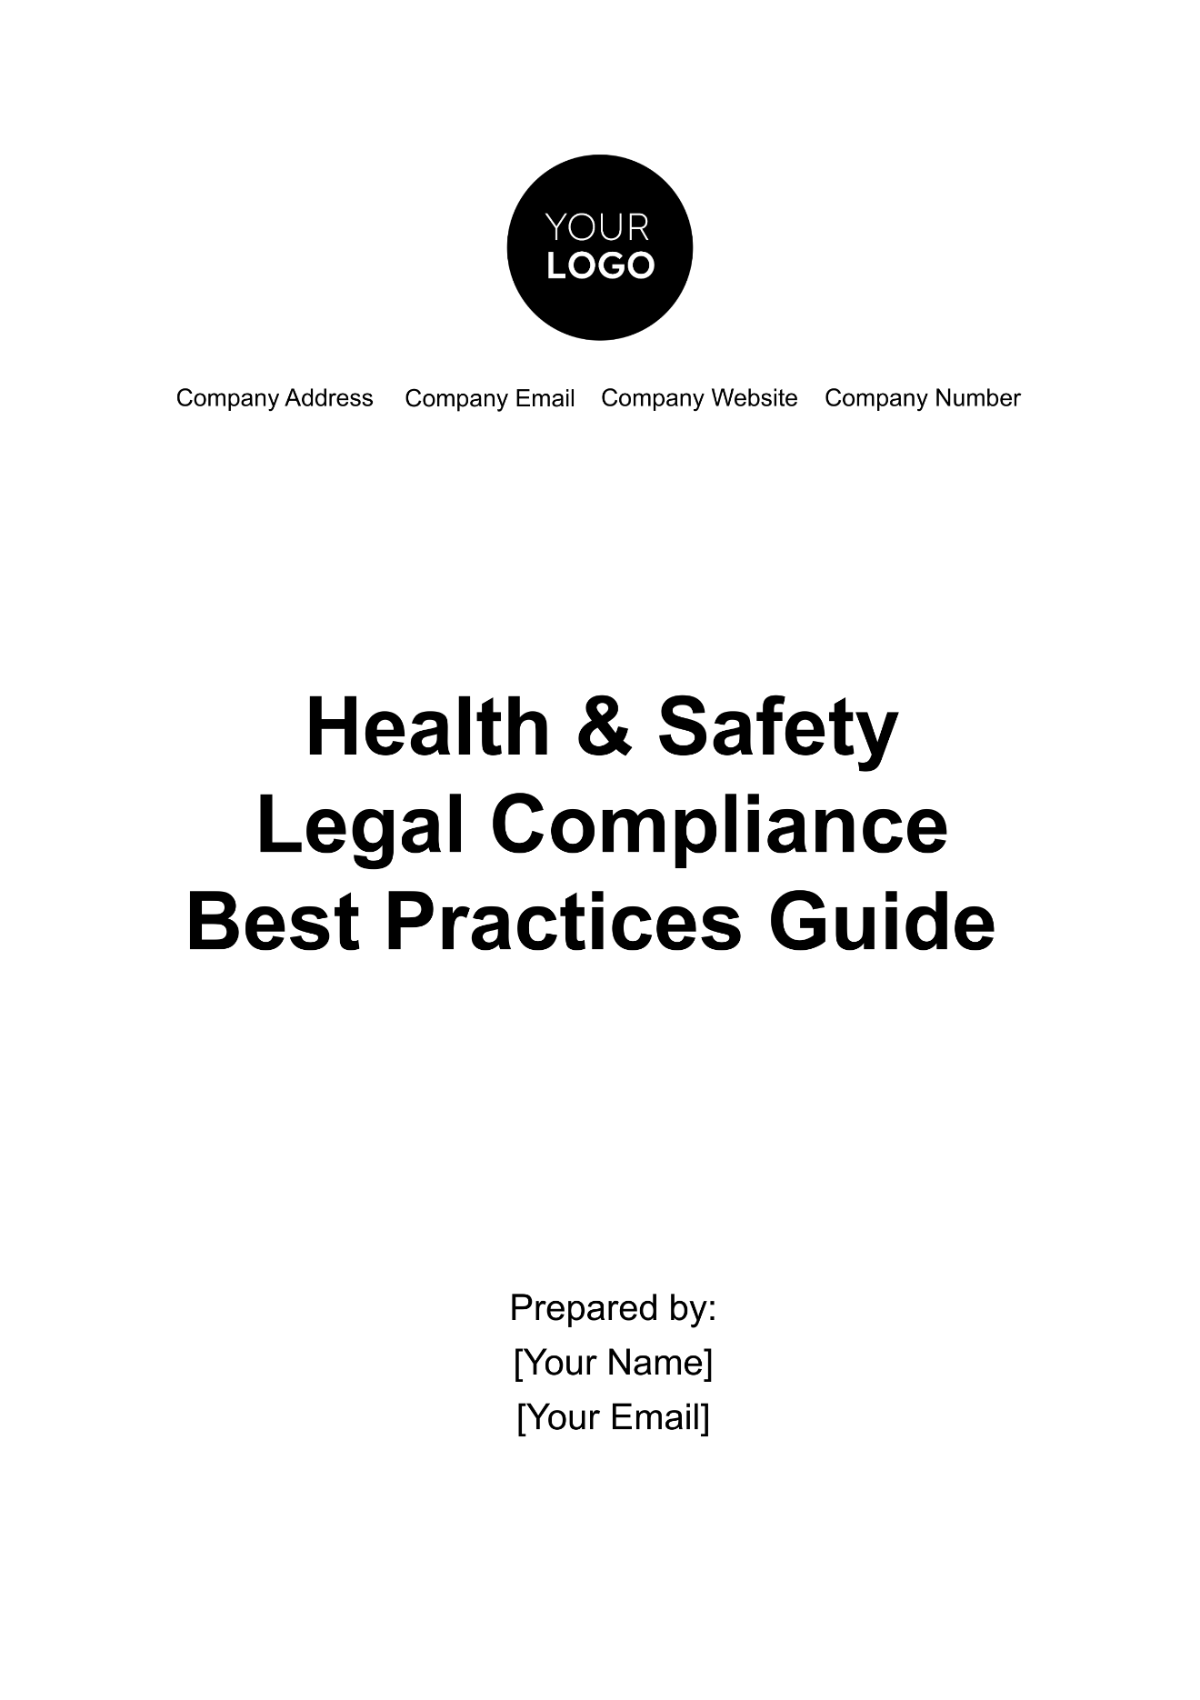 Free Health & Safety Legal Compliance Best Practices Guide Template